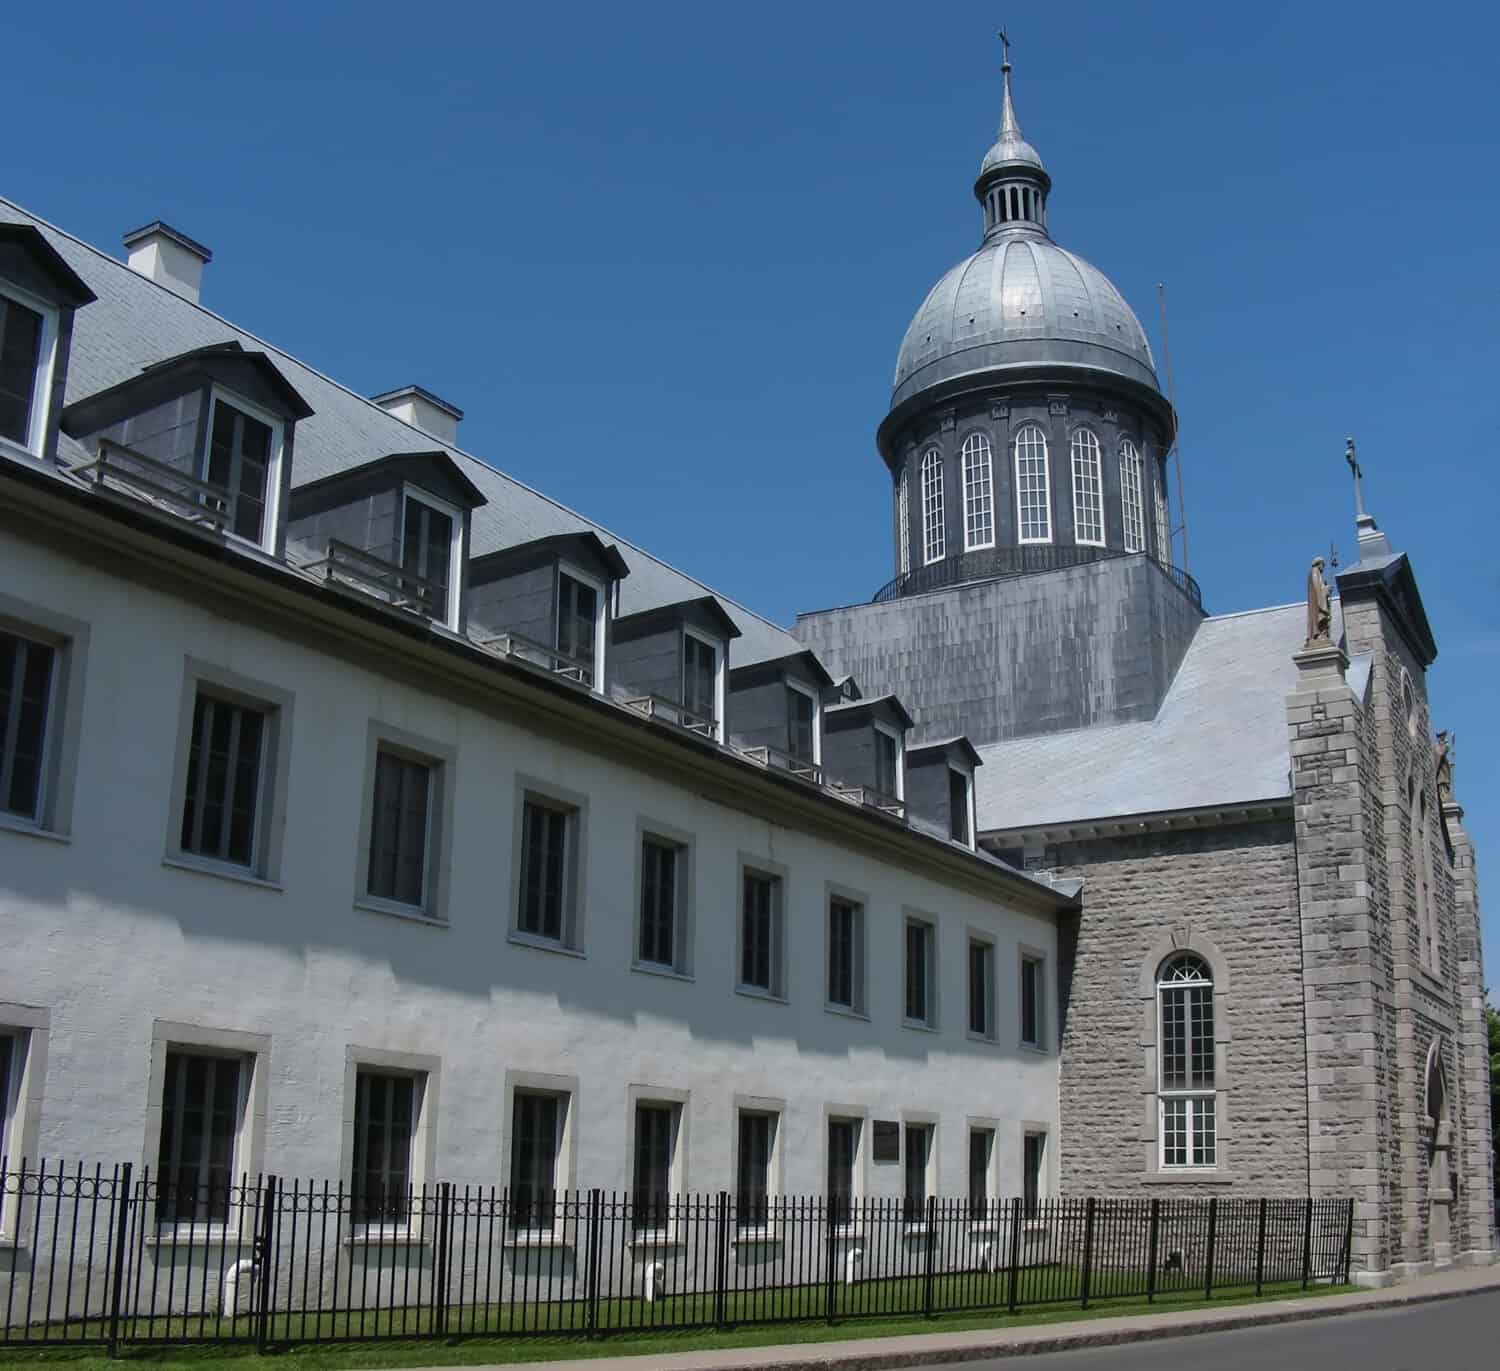 The landmark Ursuline Convent in the historic old town of Trois Rivieres, Quebec.